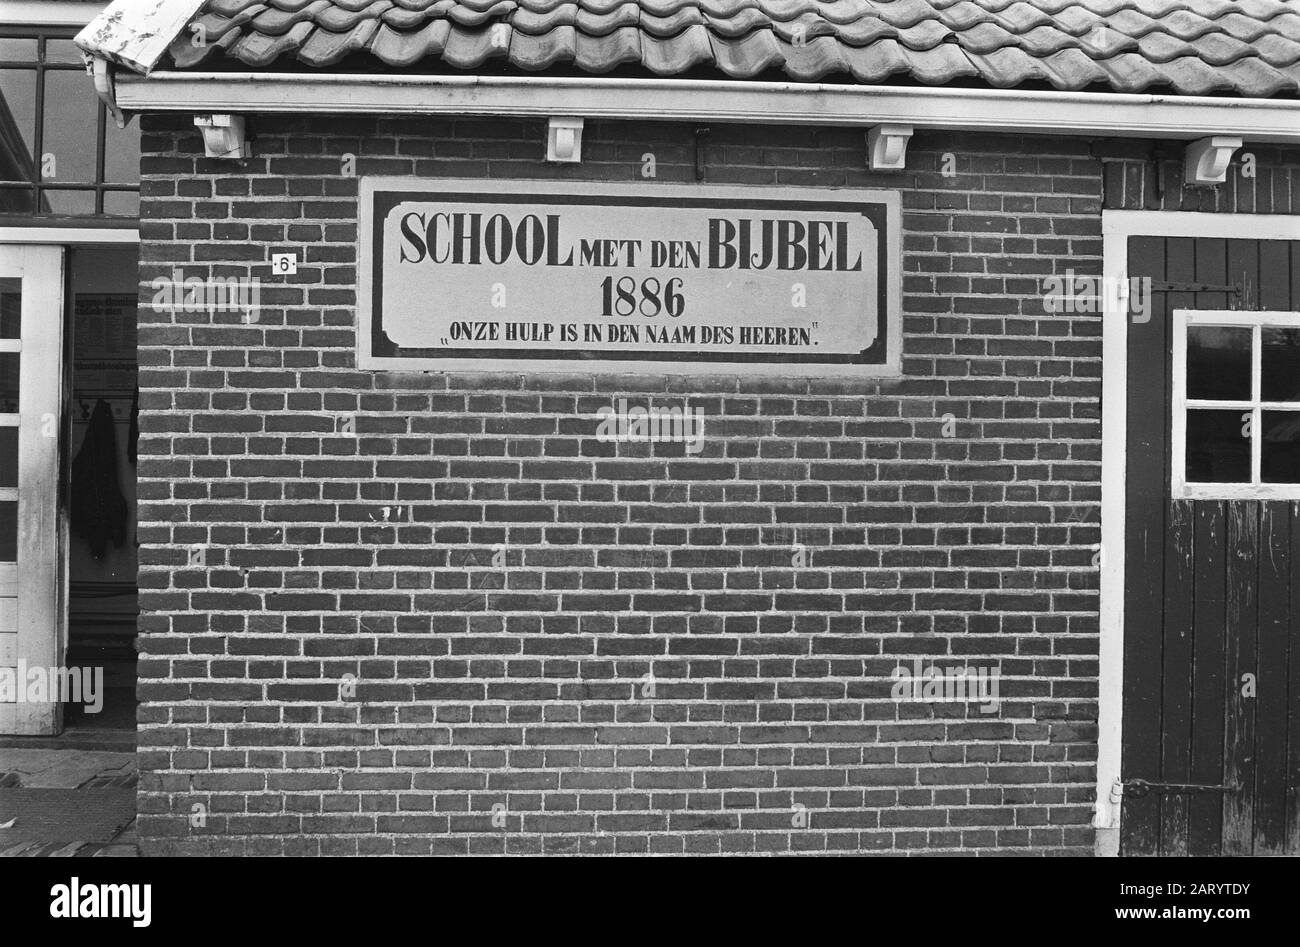 Staphorst  Outbreak polio in Staphorst.. School with the Bible from 1886, with the text: Our help is in den name des Heeren Date: March 15, 1971 Location: Overijssel, Staphorst Keywords: christian education, village images, schools Stock Photo